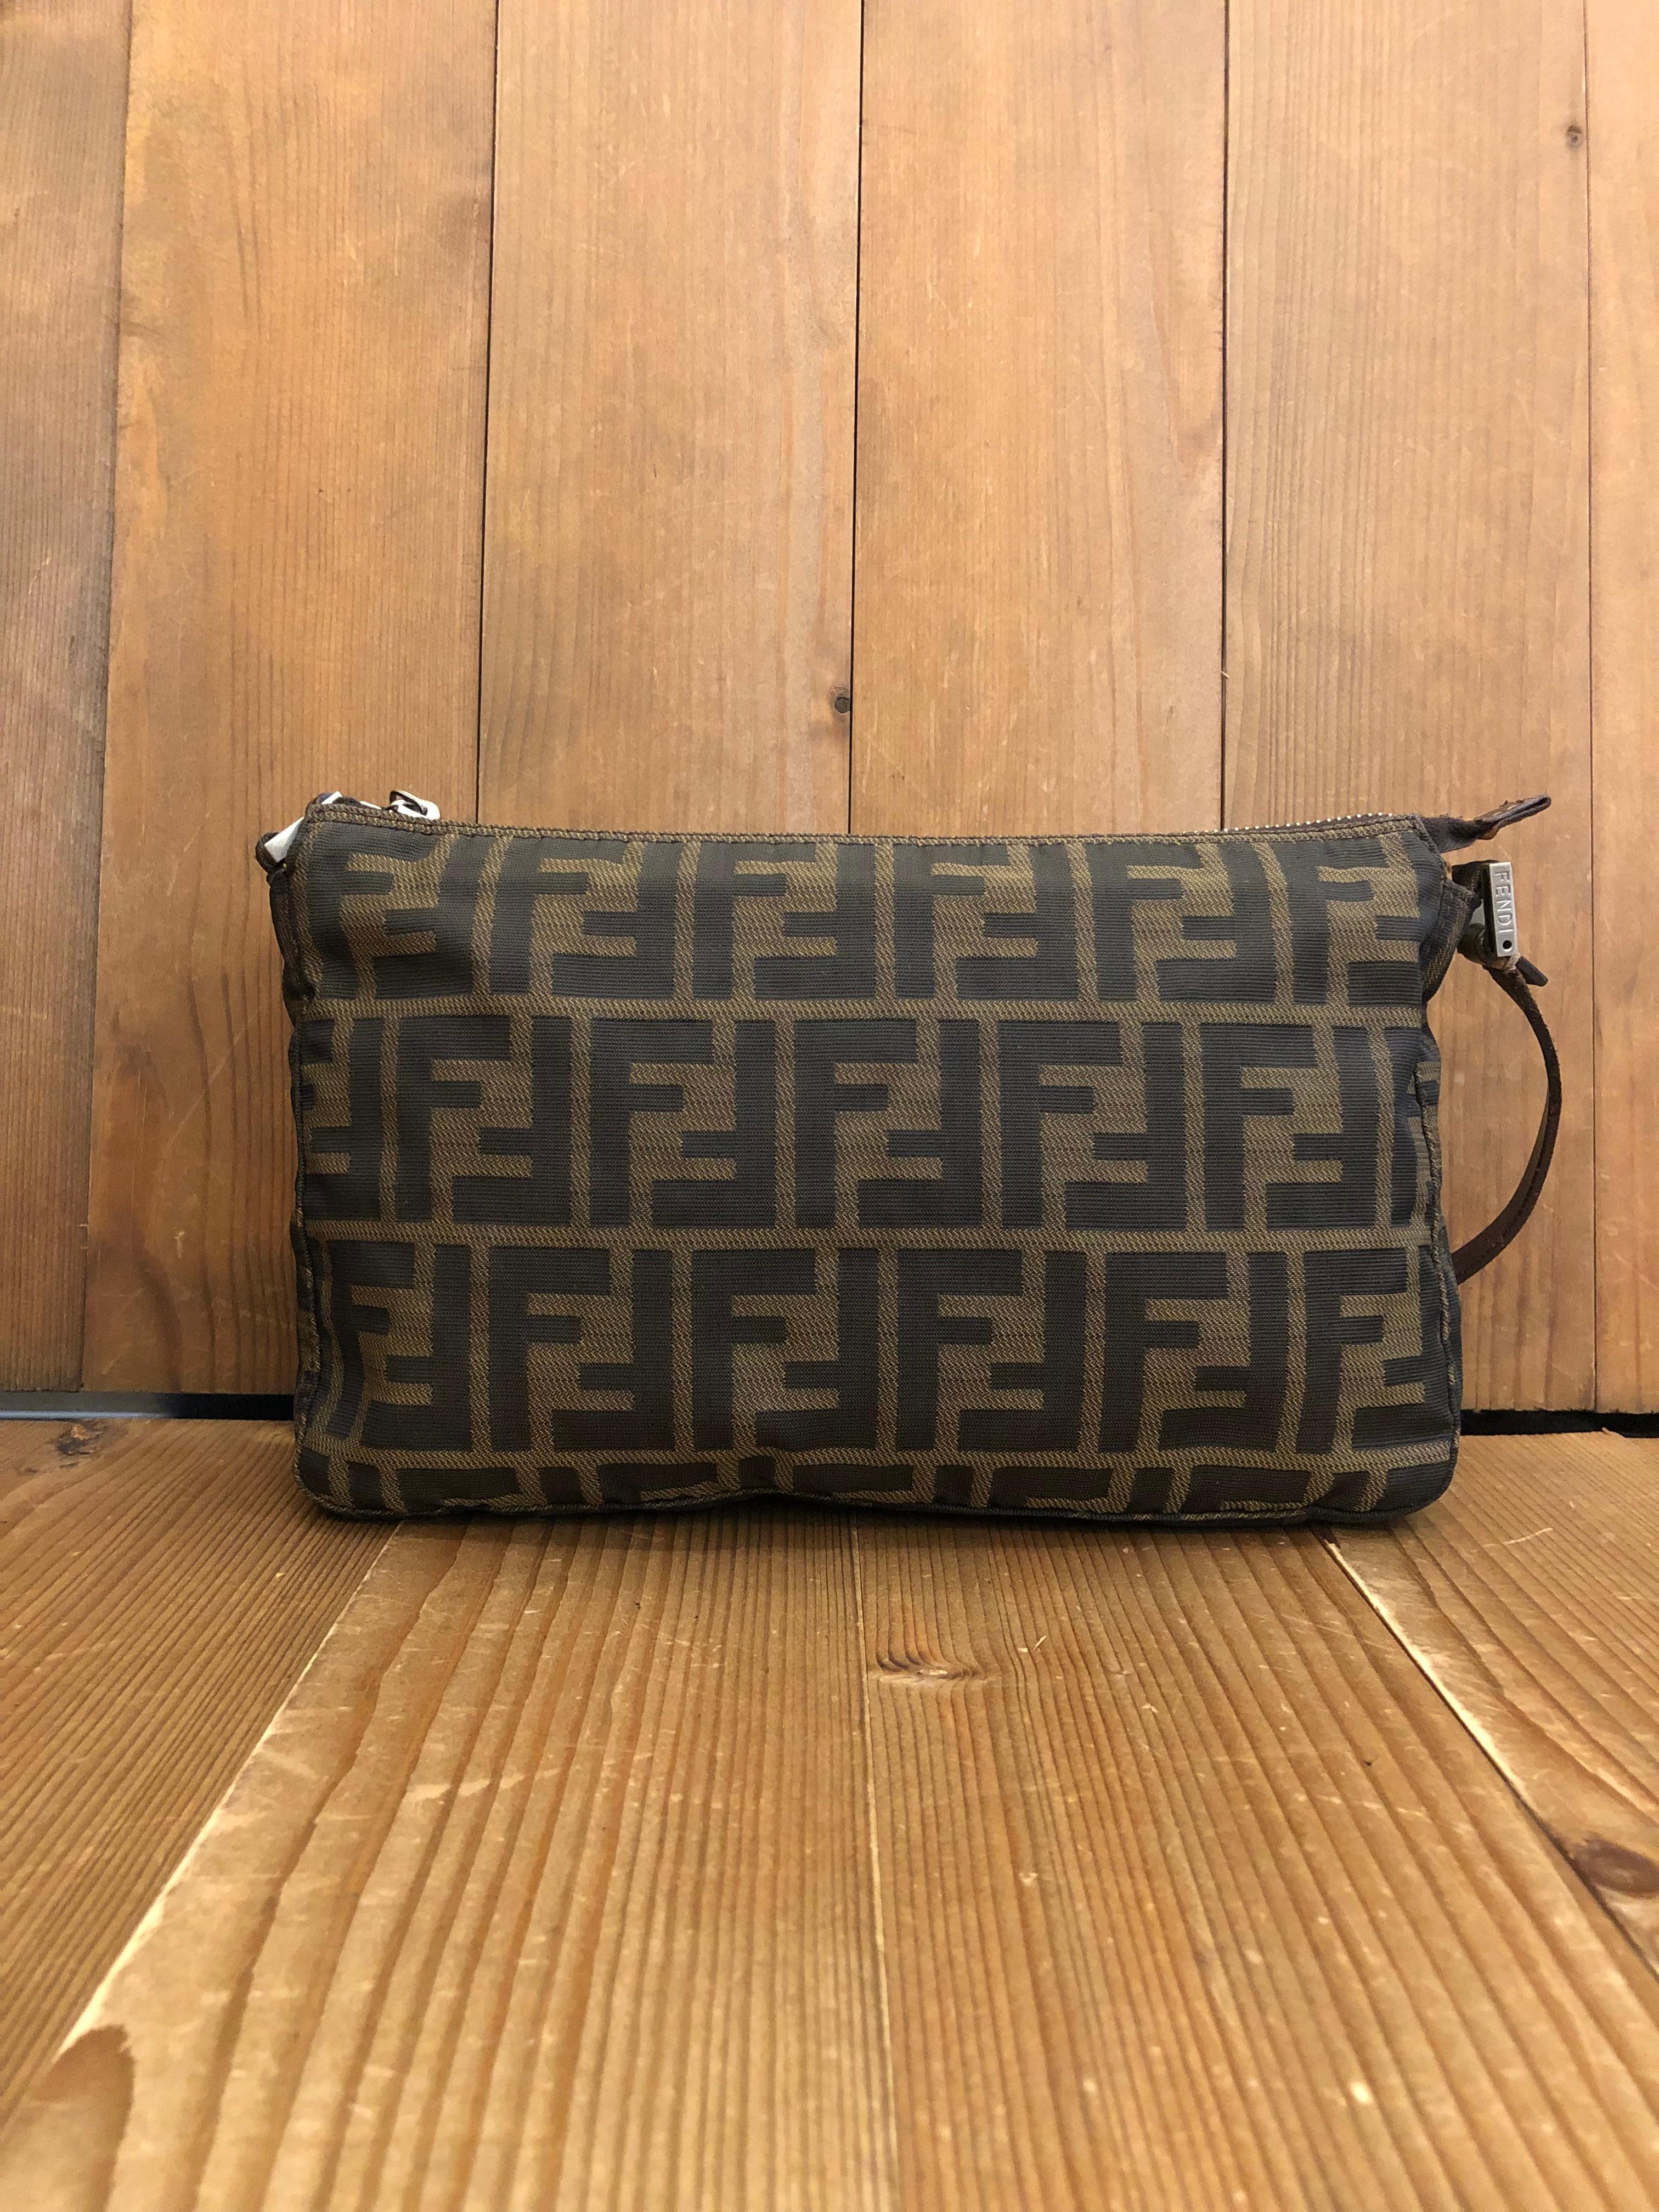 Vintage Fendi pouch handbag in Fendi's iconic brown Zucca jacquard with silver toned black enameled hardware. Zipper top closure opens to an interior lined with brown fabric featuring one zippered pocket. Made in Italy. Measures 9.5 x 6 x 1.75